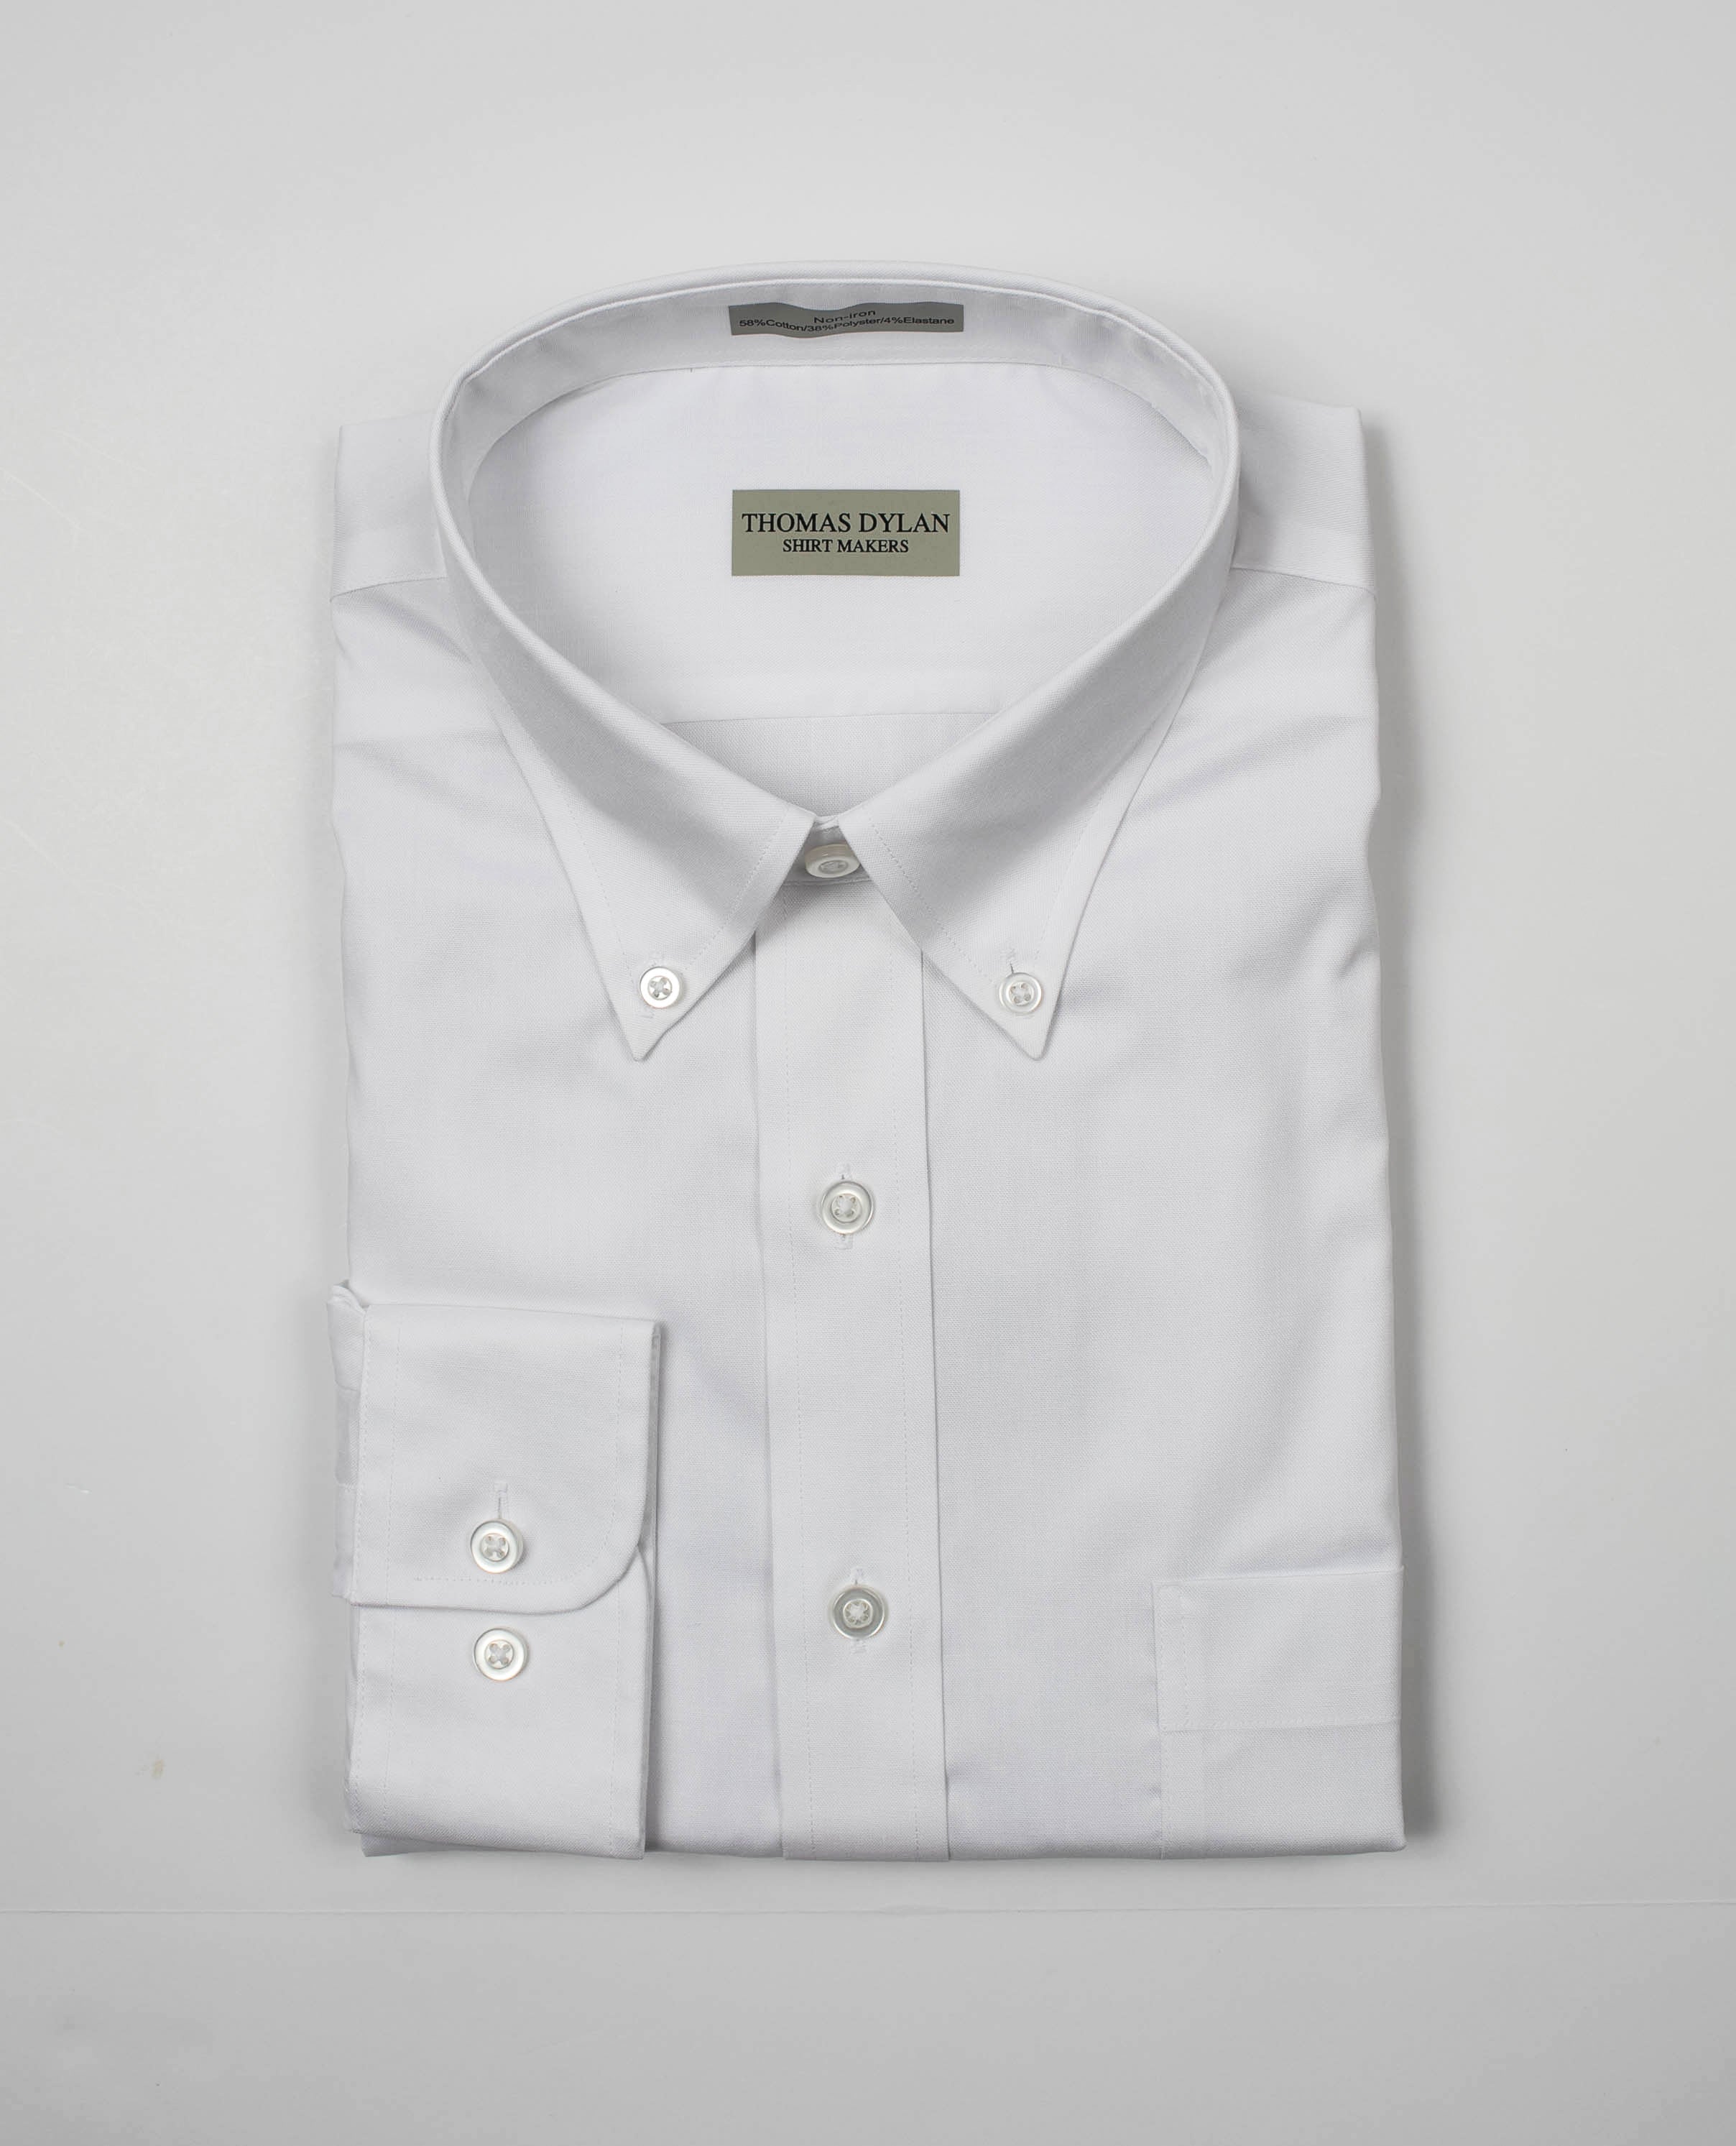 130 TF BD - Thomas Dylan White Tailored Fit Button Down Collar